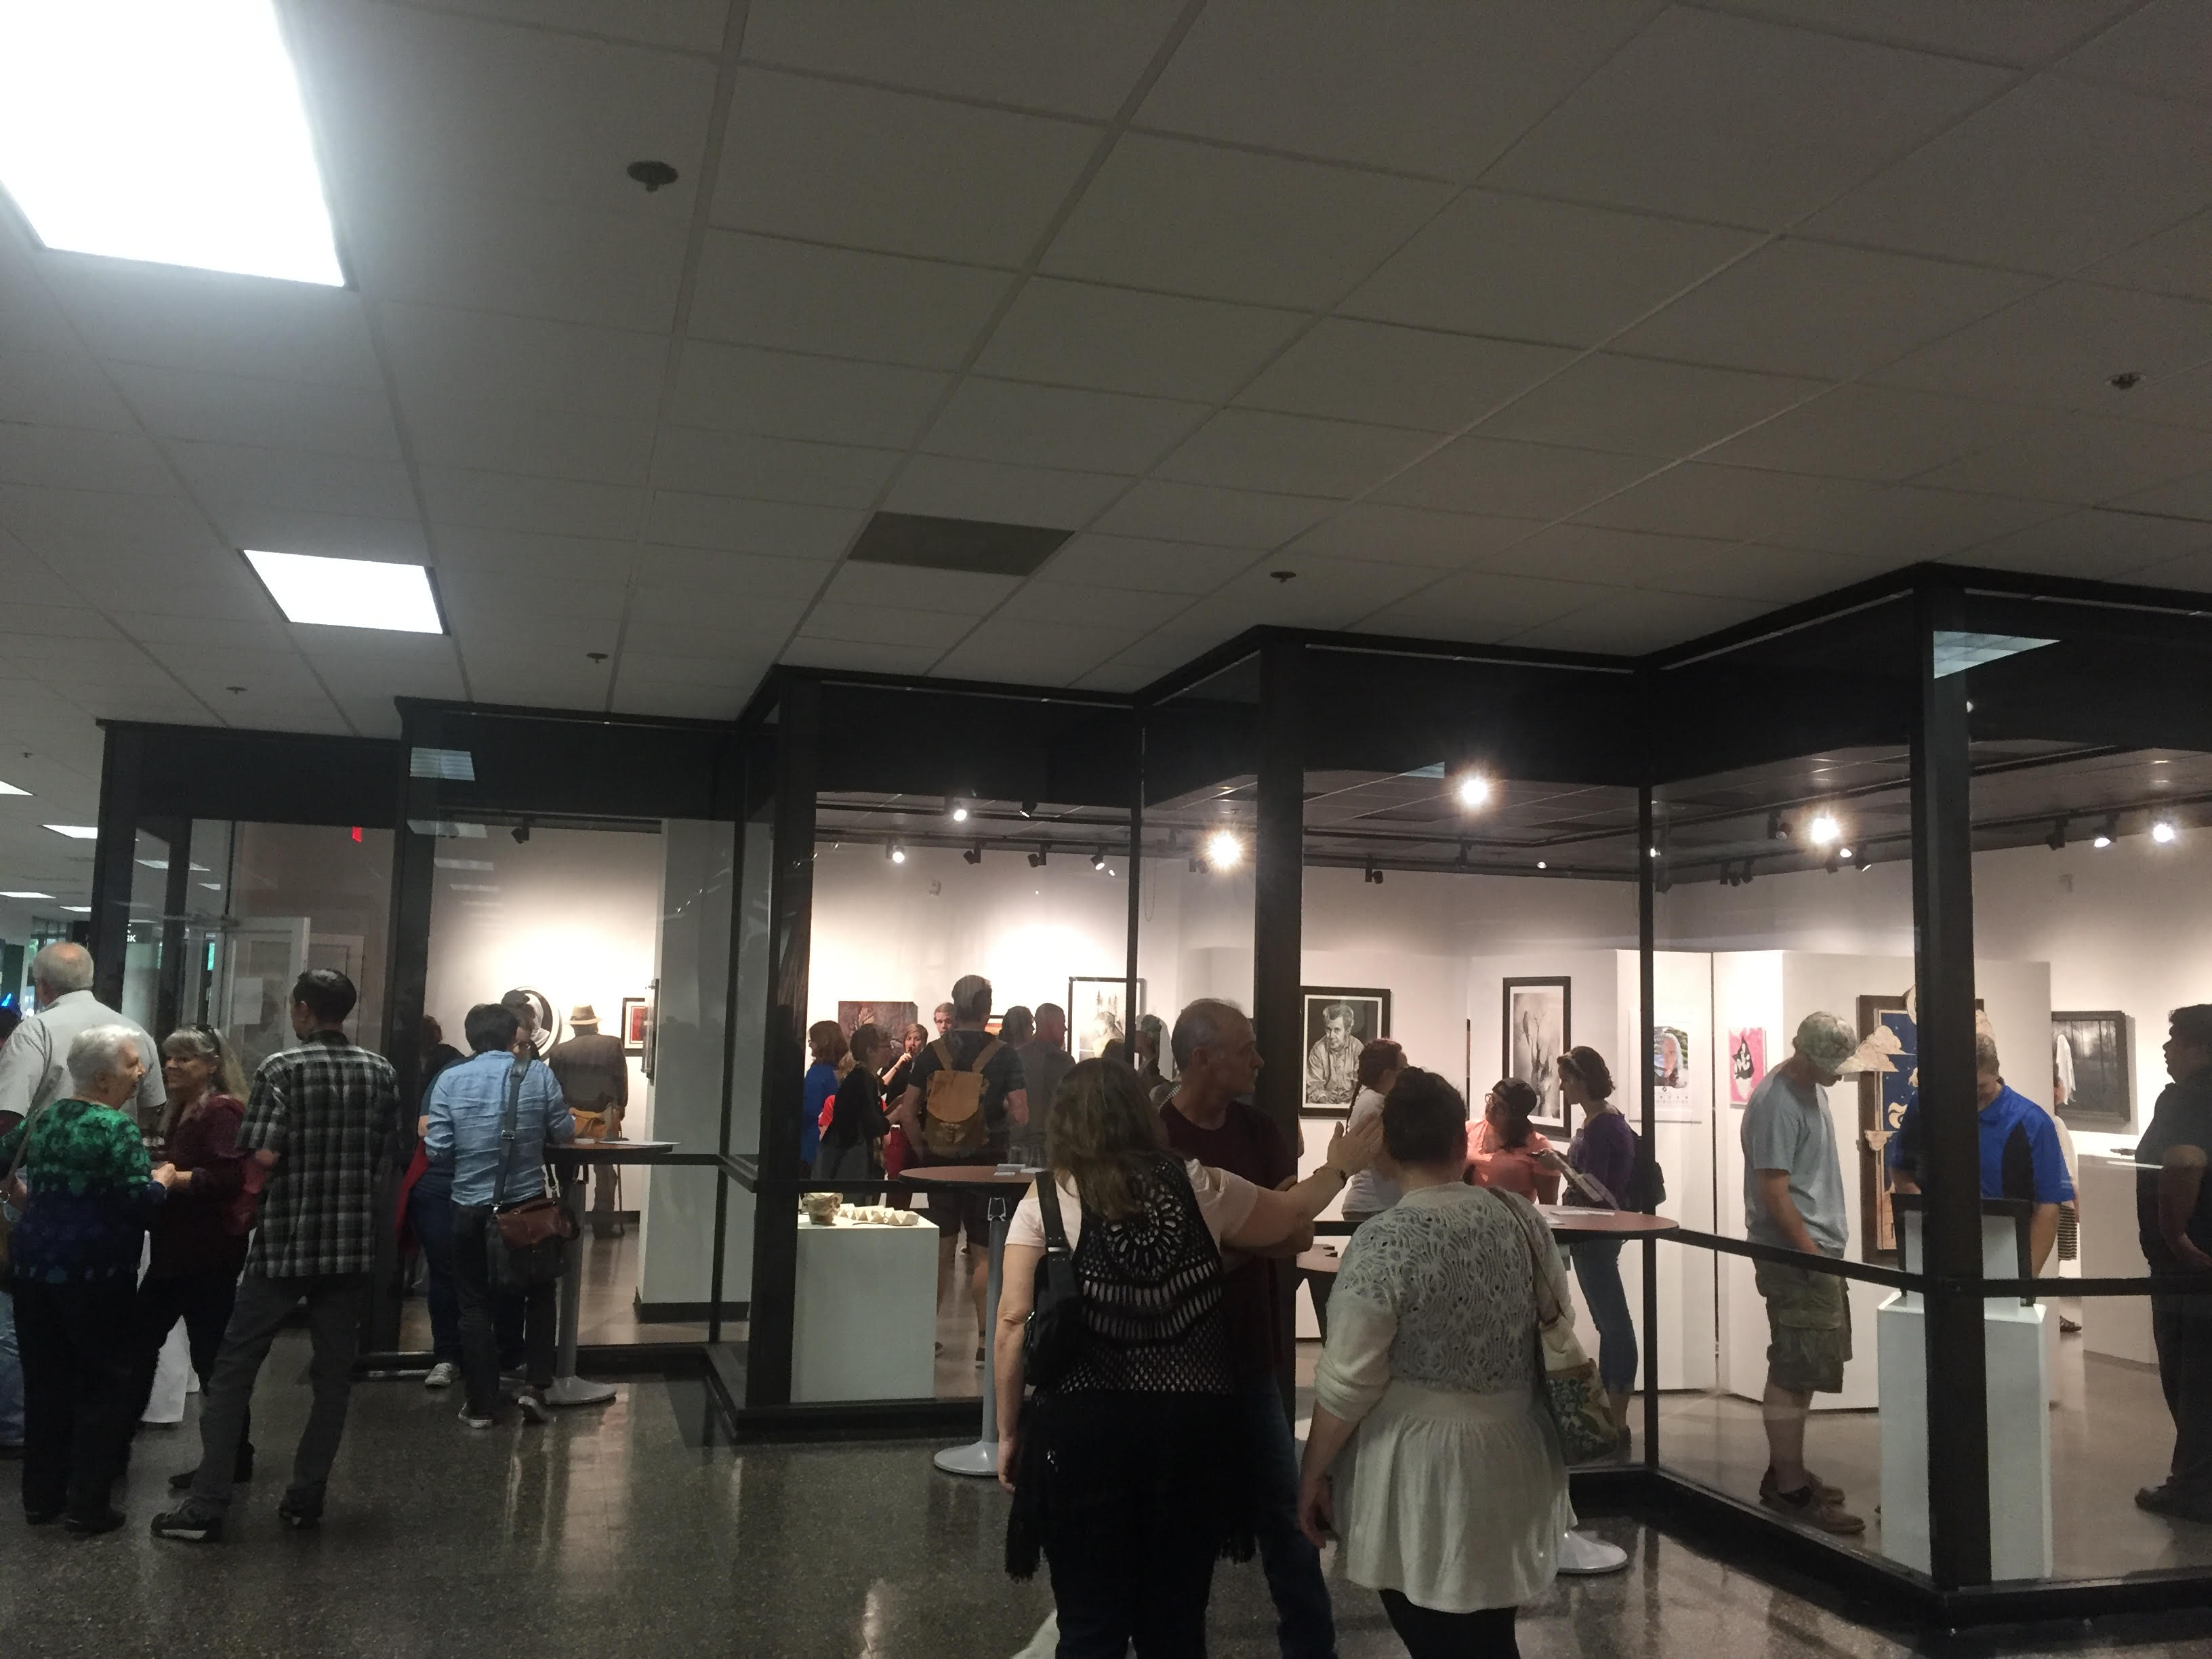 The UHCL Art Gallery unveiled its new exhibit April 14 at the opening reception for the Bachelor of Fine Arts Exhibition. Photo by The Signal reporter Alexis Davlin.